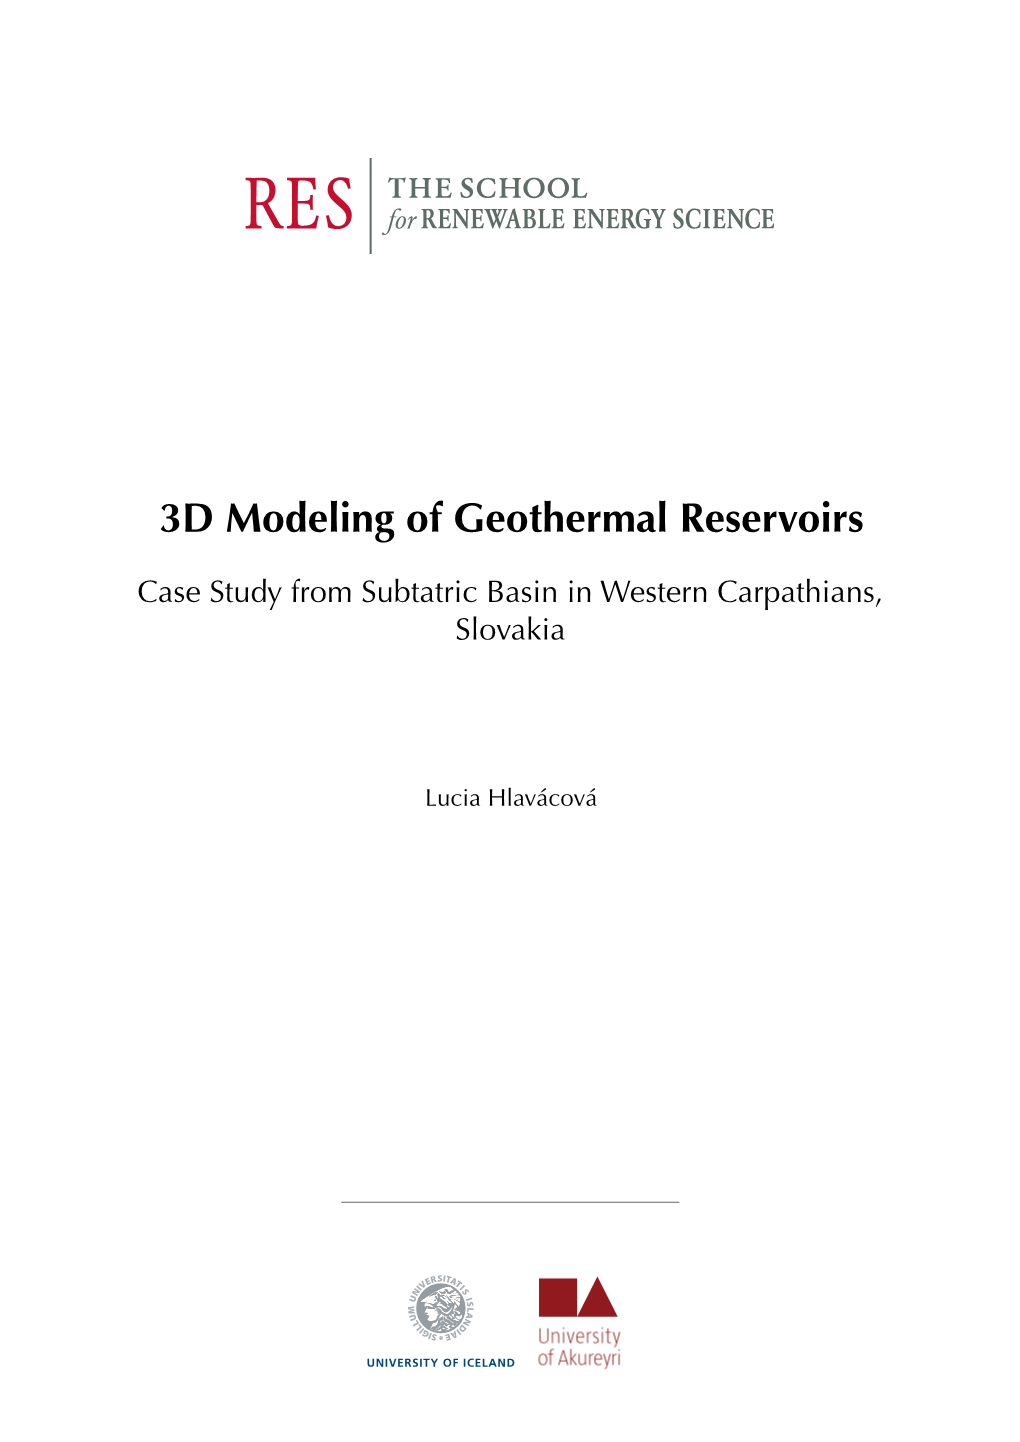 3D Modeling of Geothermal Reservoirs